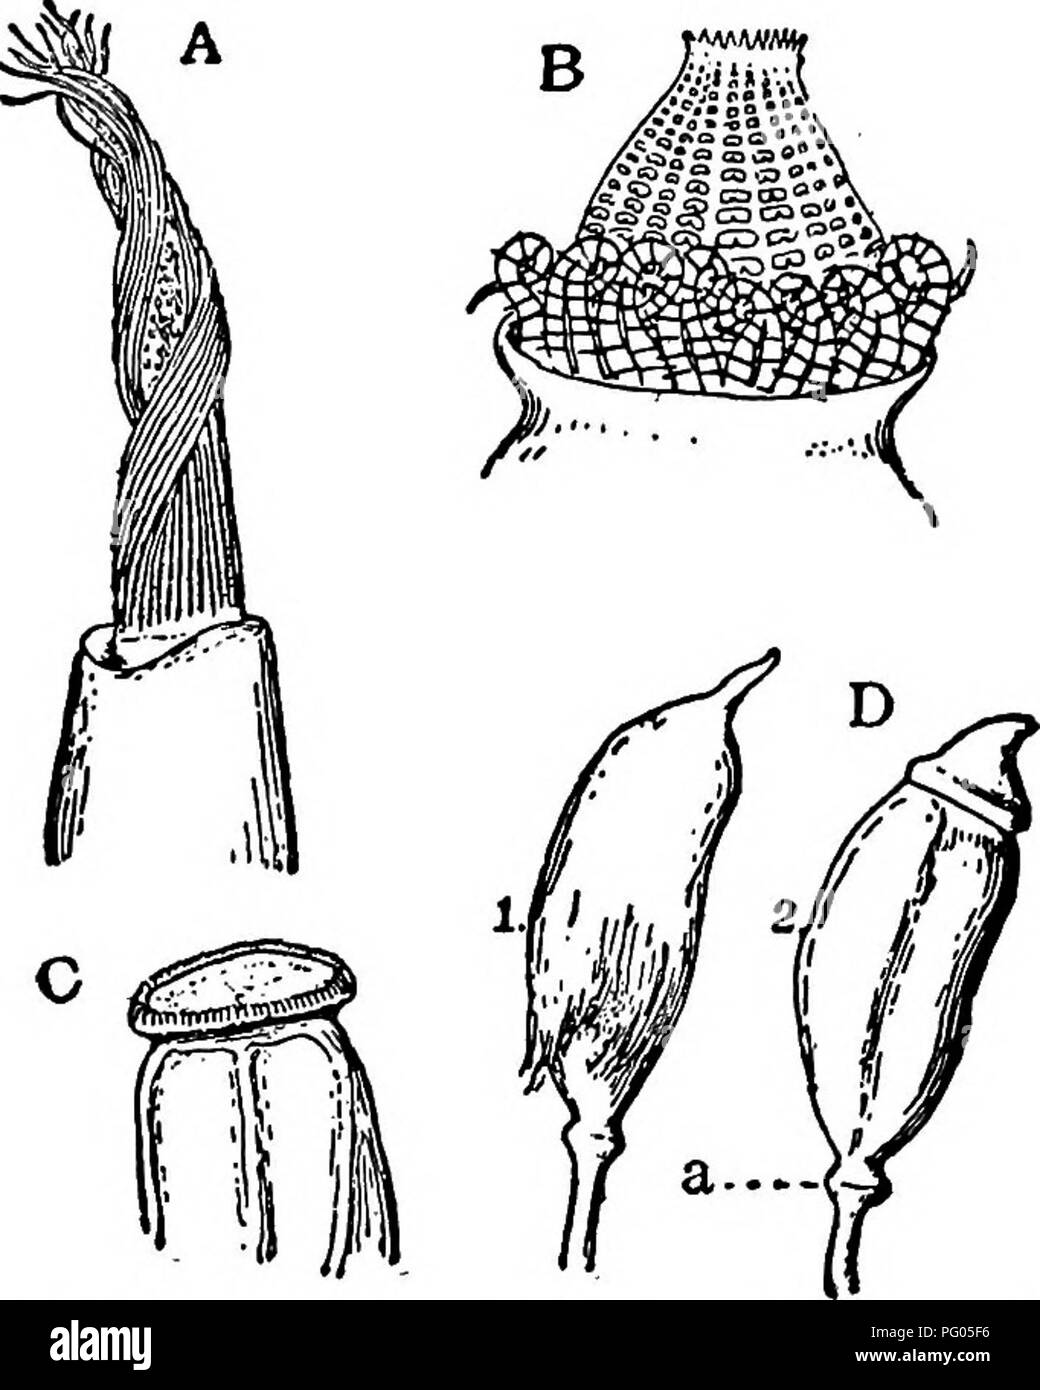 . The structure and development of mosses and ferns (Archegoniatae). Plant morphology; Mosses; Ferns. 220 MOSSES AND FERNS CHAP. The sporogonium of Tetraphis has a peristome of pecuHar structure, and not strictly comparable to that of any of the other Mosses. After the operculum falls off the tissue lying beneath splits into four pointed teeth, which, however, are not, as in Funaria, composed simply of the cell walls, but are masses of tissue. All the other higher Bryales, with the exception of the Polytrichacese, have the peristome of essentially the same struc- ture as that described for Fun Stock Photo